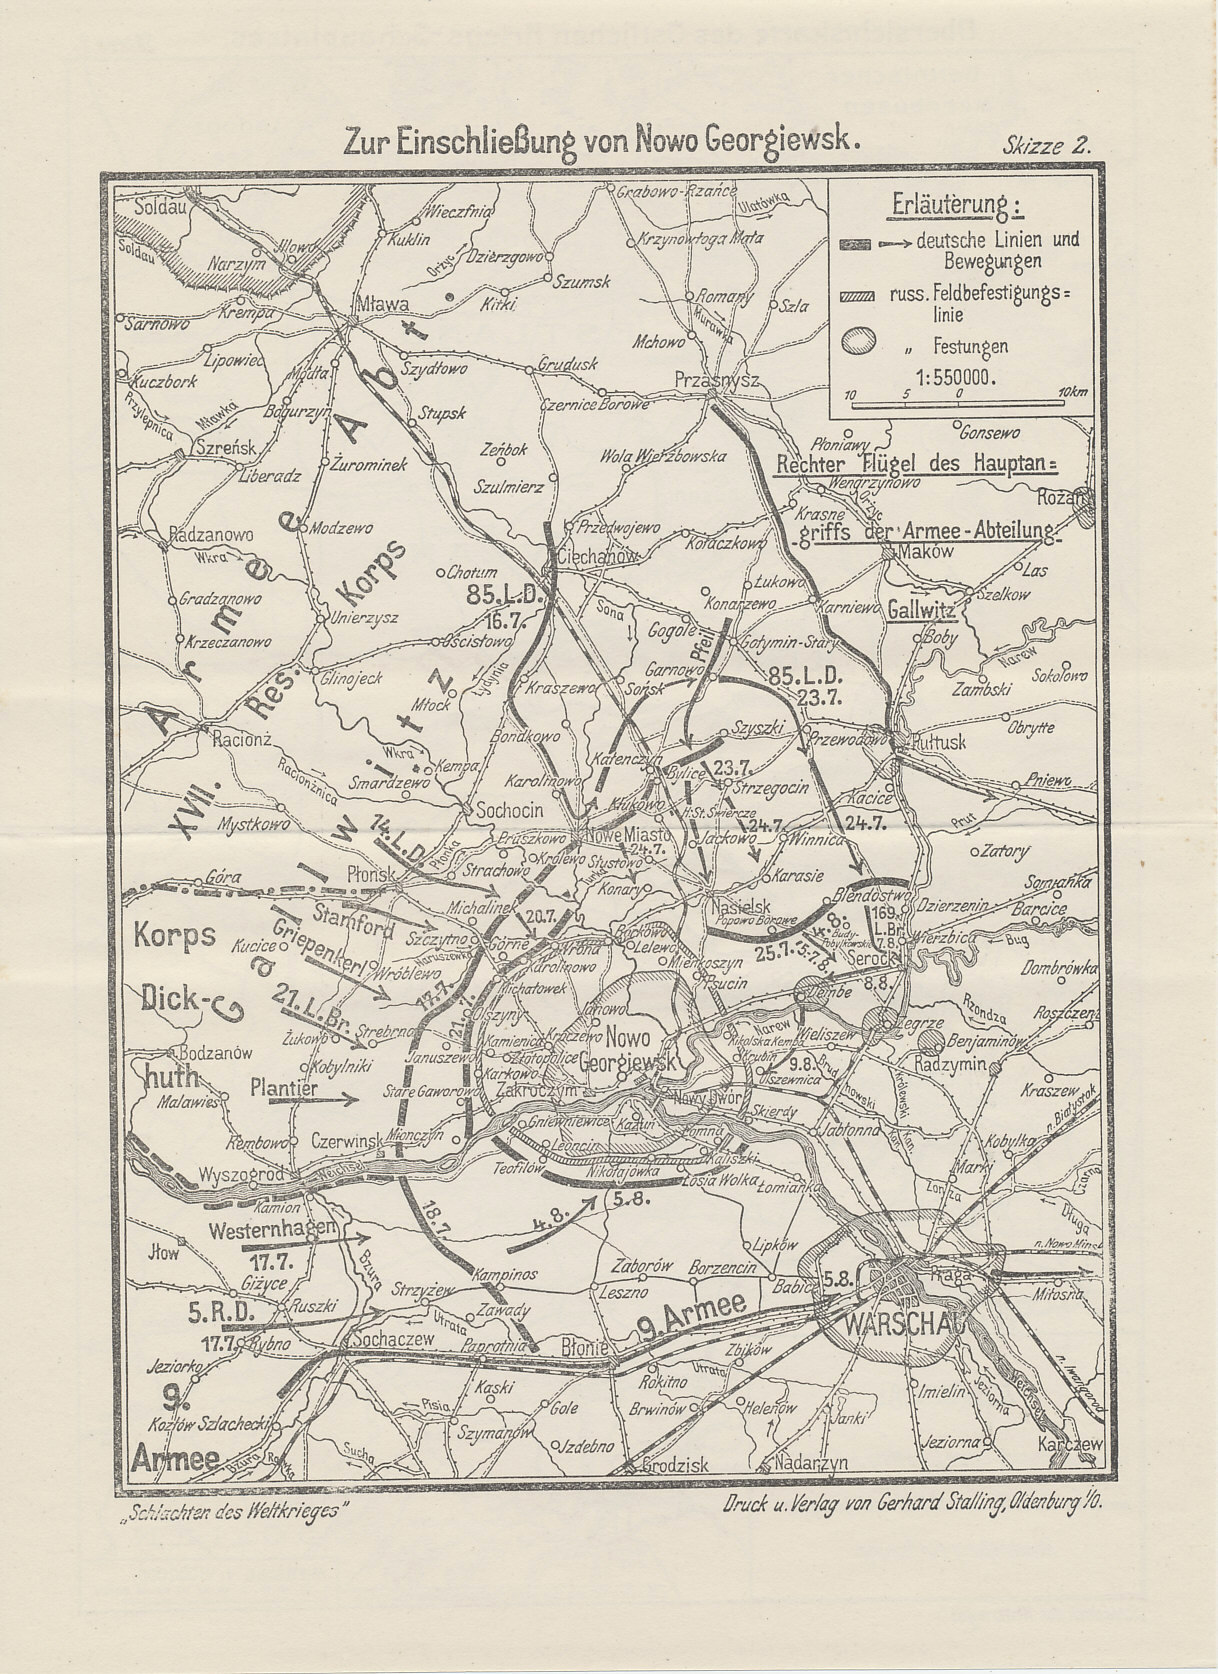 Map of the the Warsaw sector with the Russian Fortress of Novo Georgievsk, August, 1915 from The Capture of Novo Georgievsk, Volume 8 of the Reichsarchive history Battles of the World War.